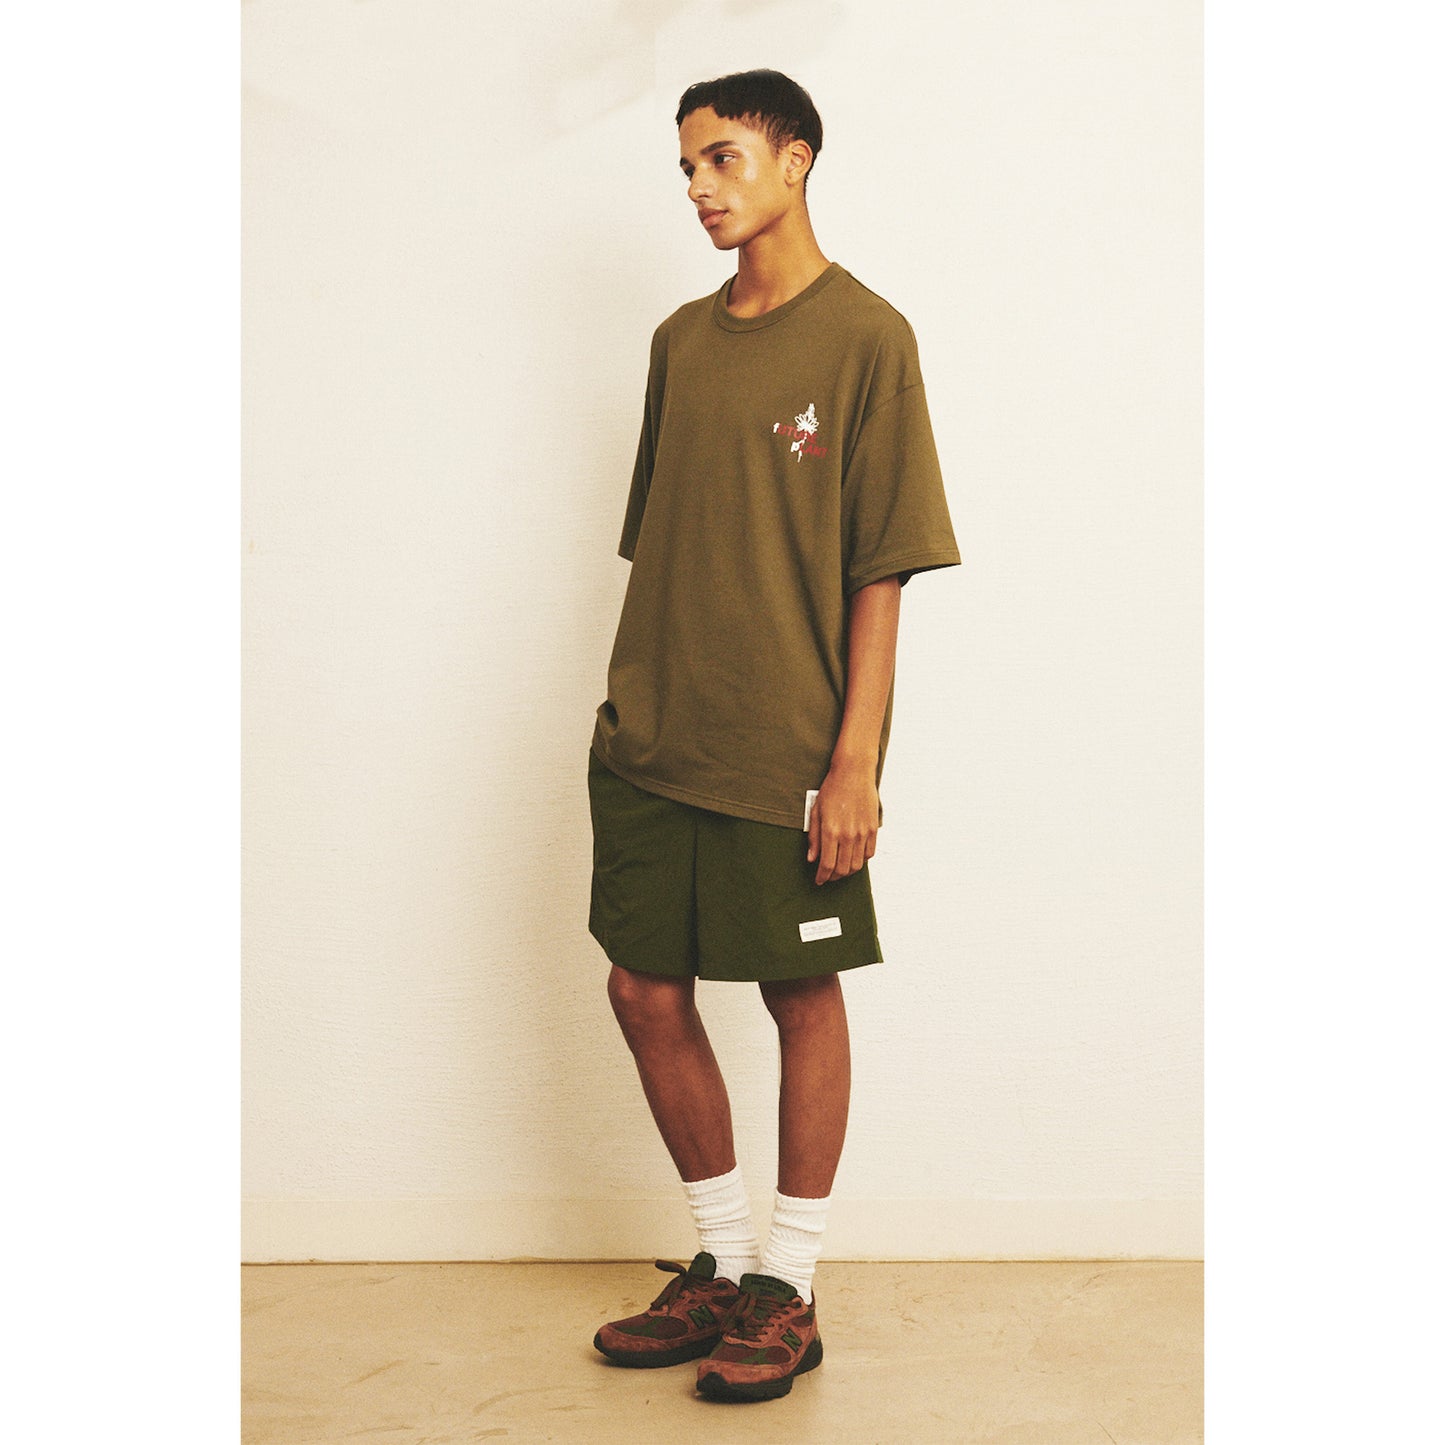 FP SS T-SHIRT / OLIVE